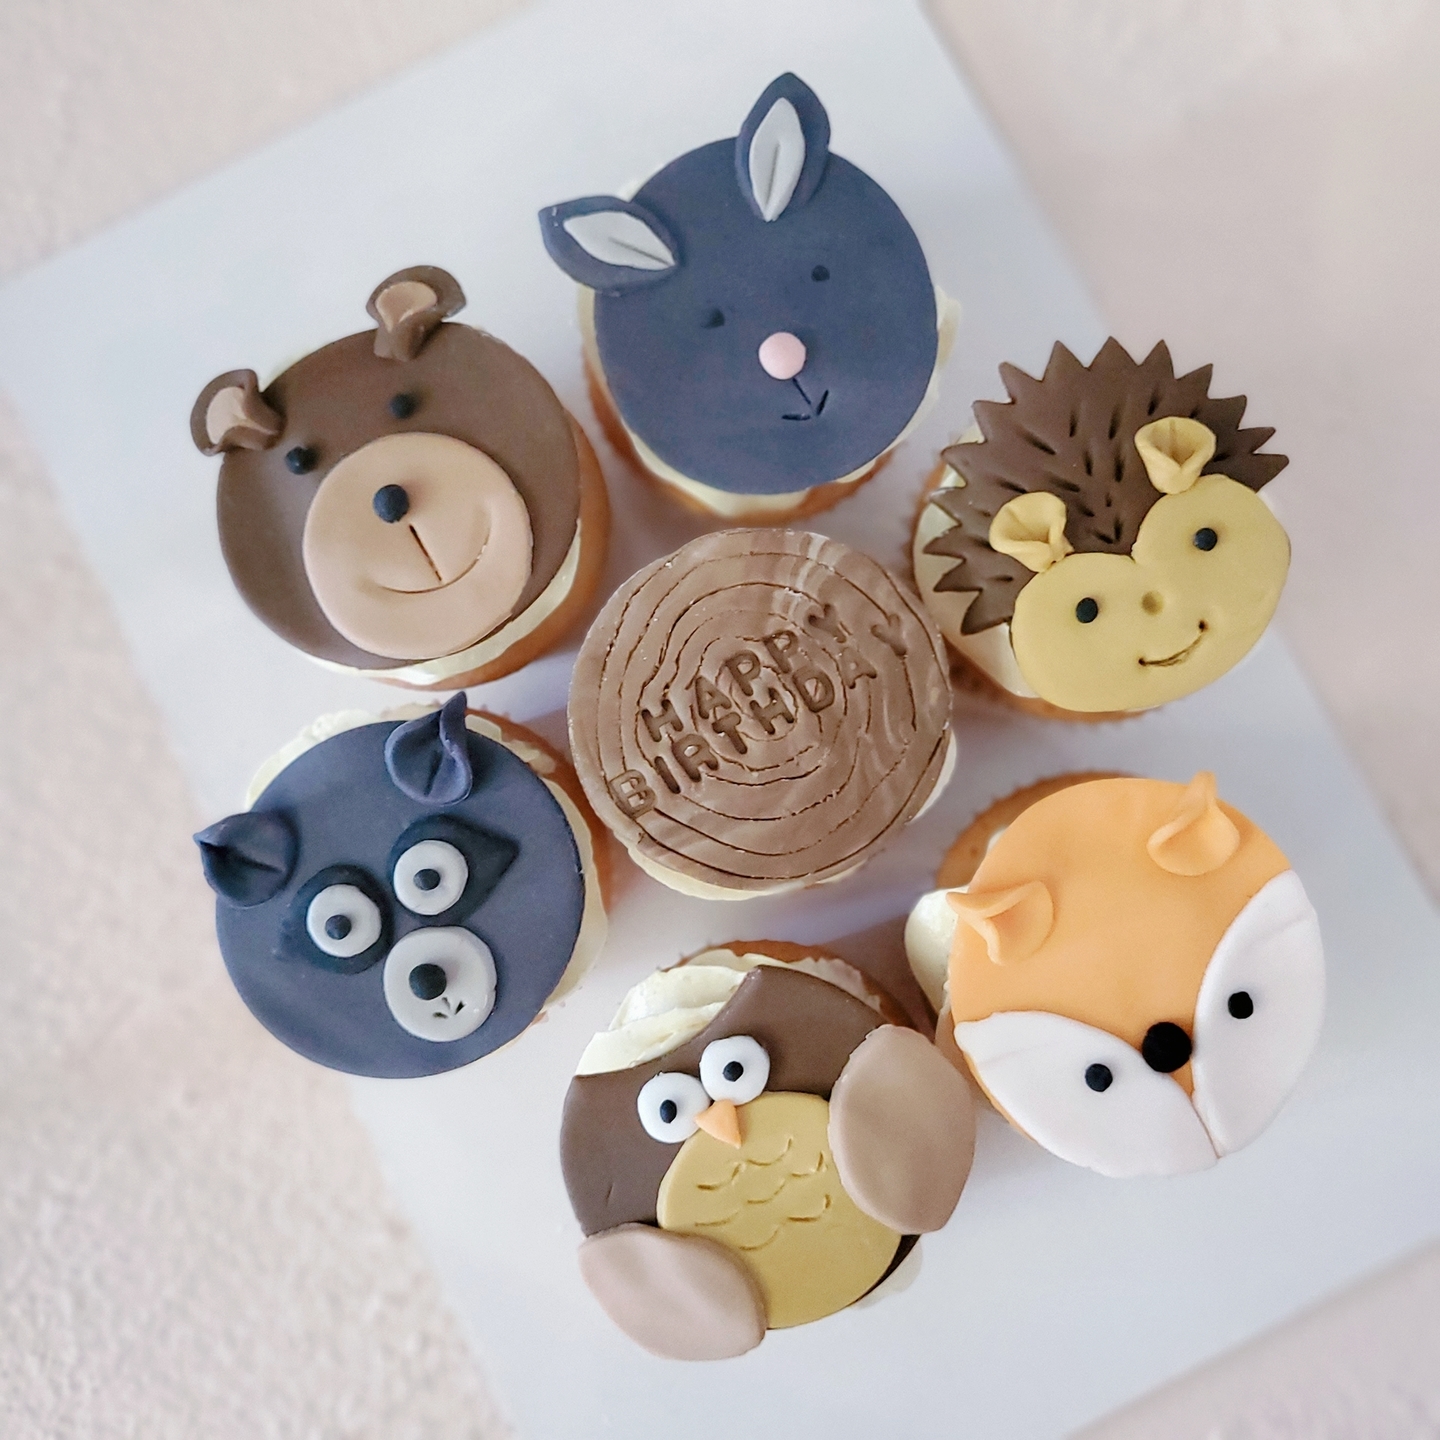 Woodland Friends Themed Cupcakes